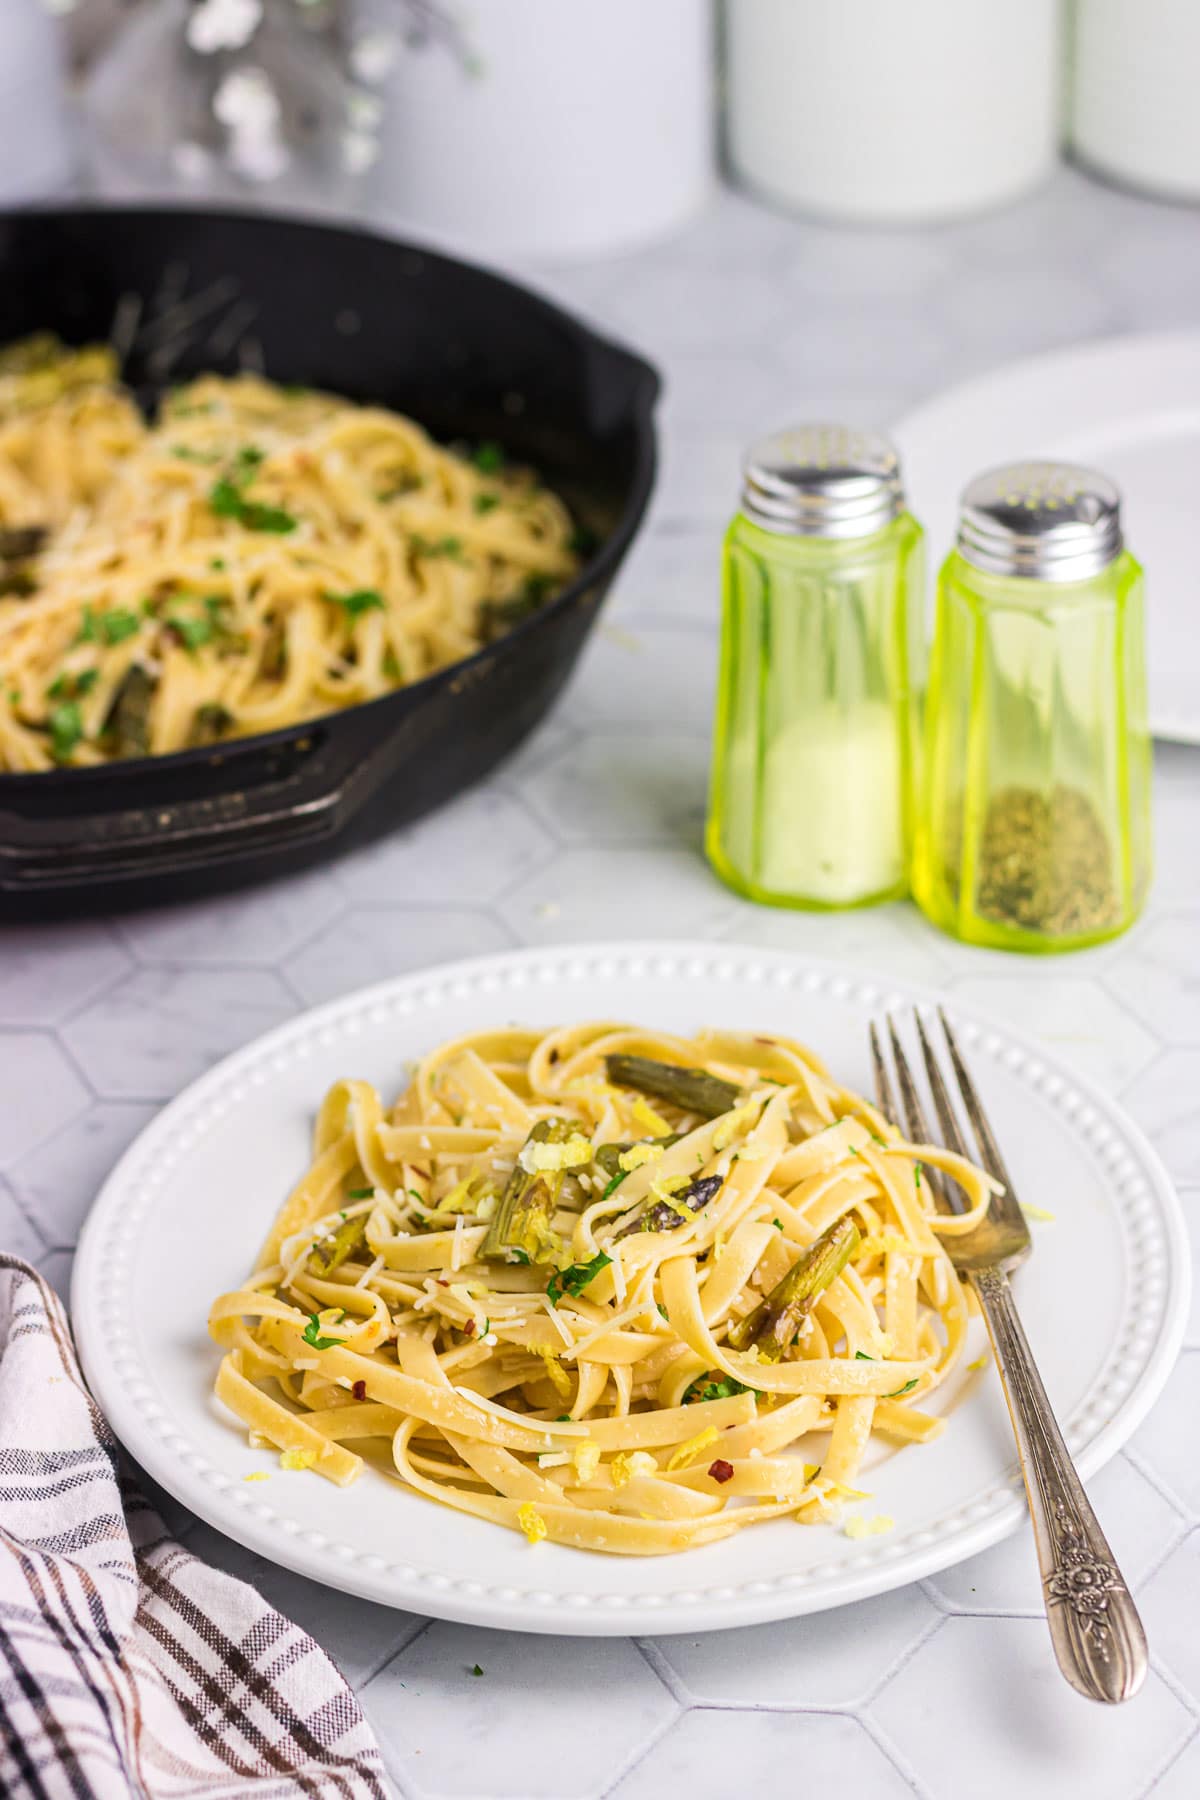 Asparagus pasta with parmesan cheese and herbs on a dinner plate.